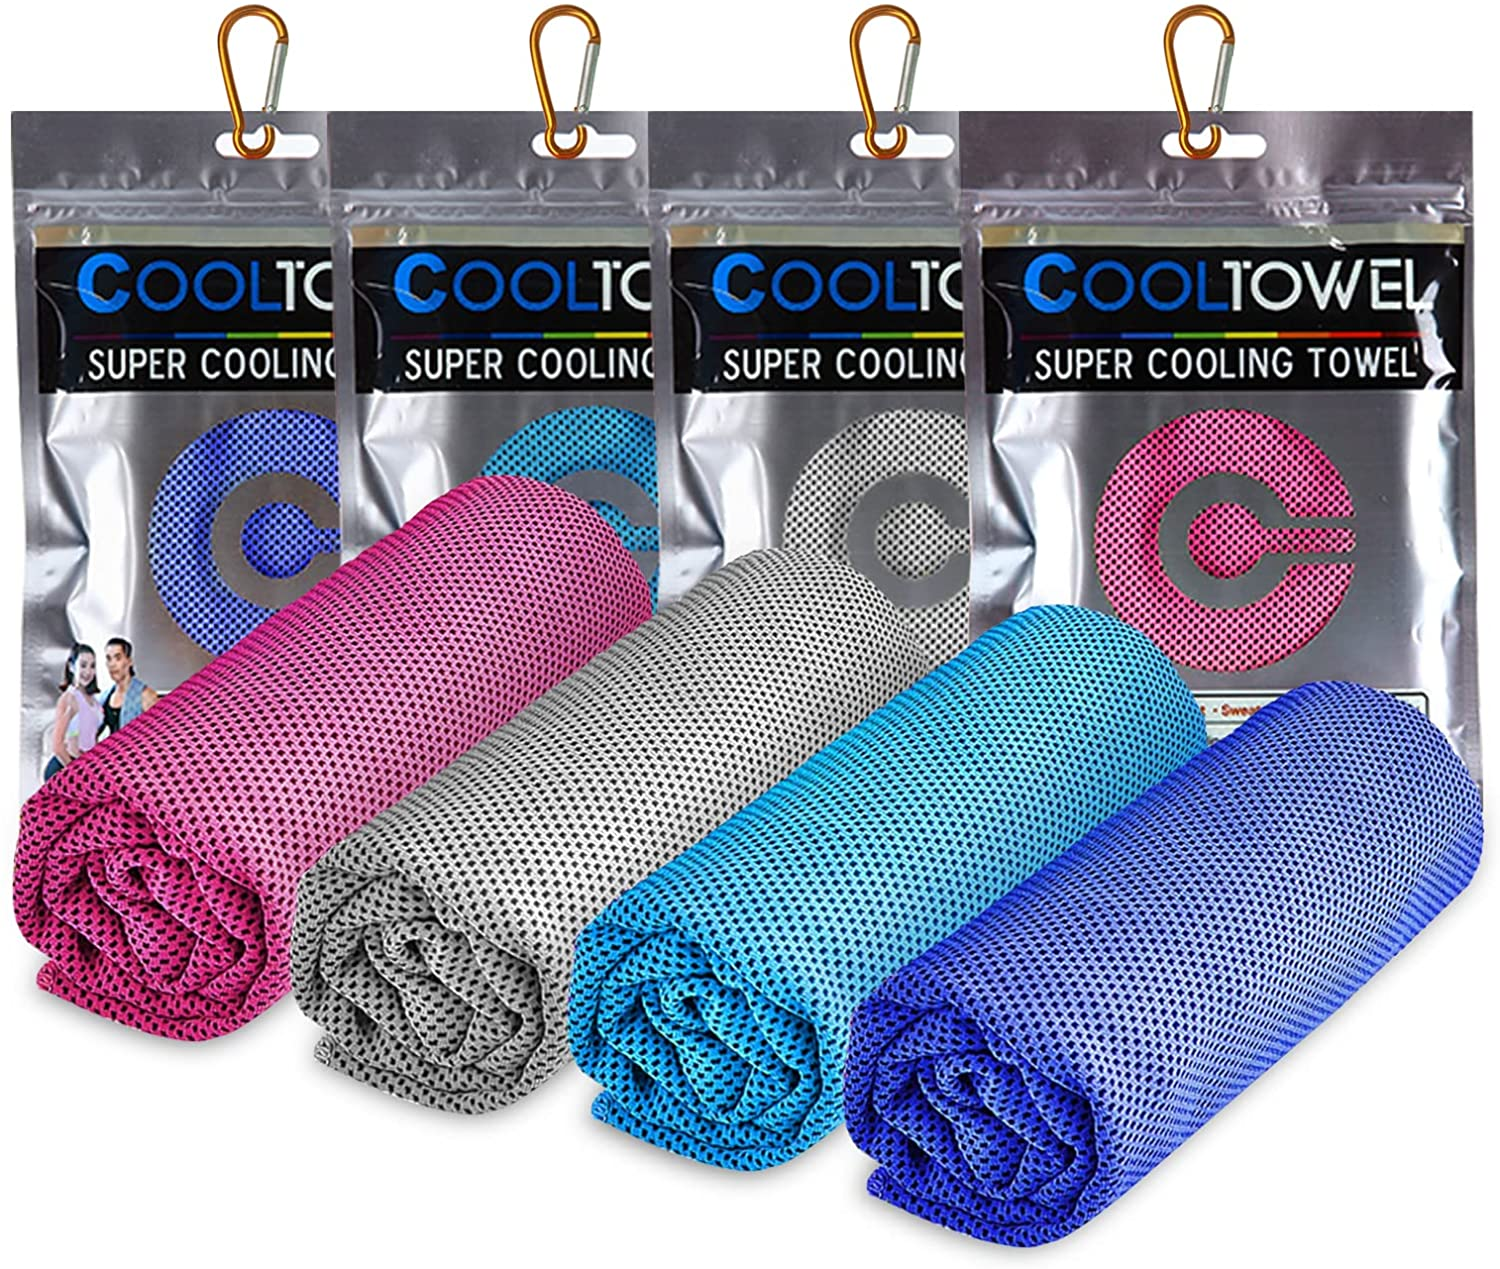 Cooling Towel (40"X12") Microfiber Cool Towel for Neck, Soft Breathable Workout Towels for Gym, Running, Yoga and More Activities